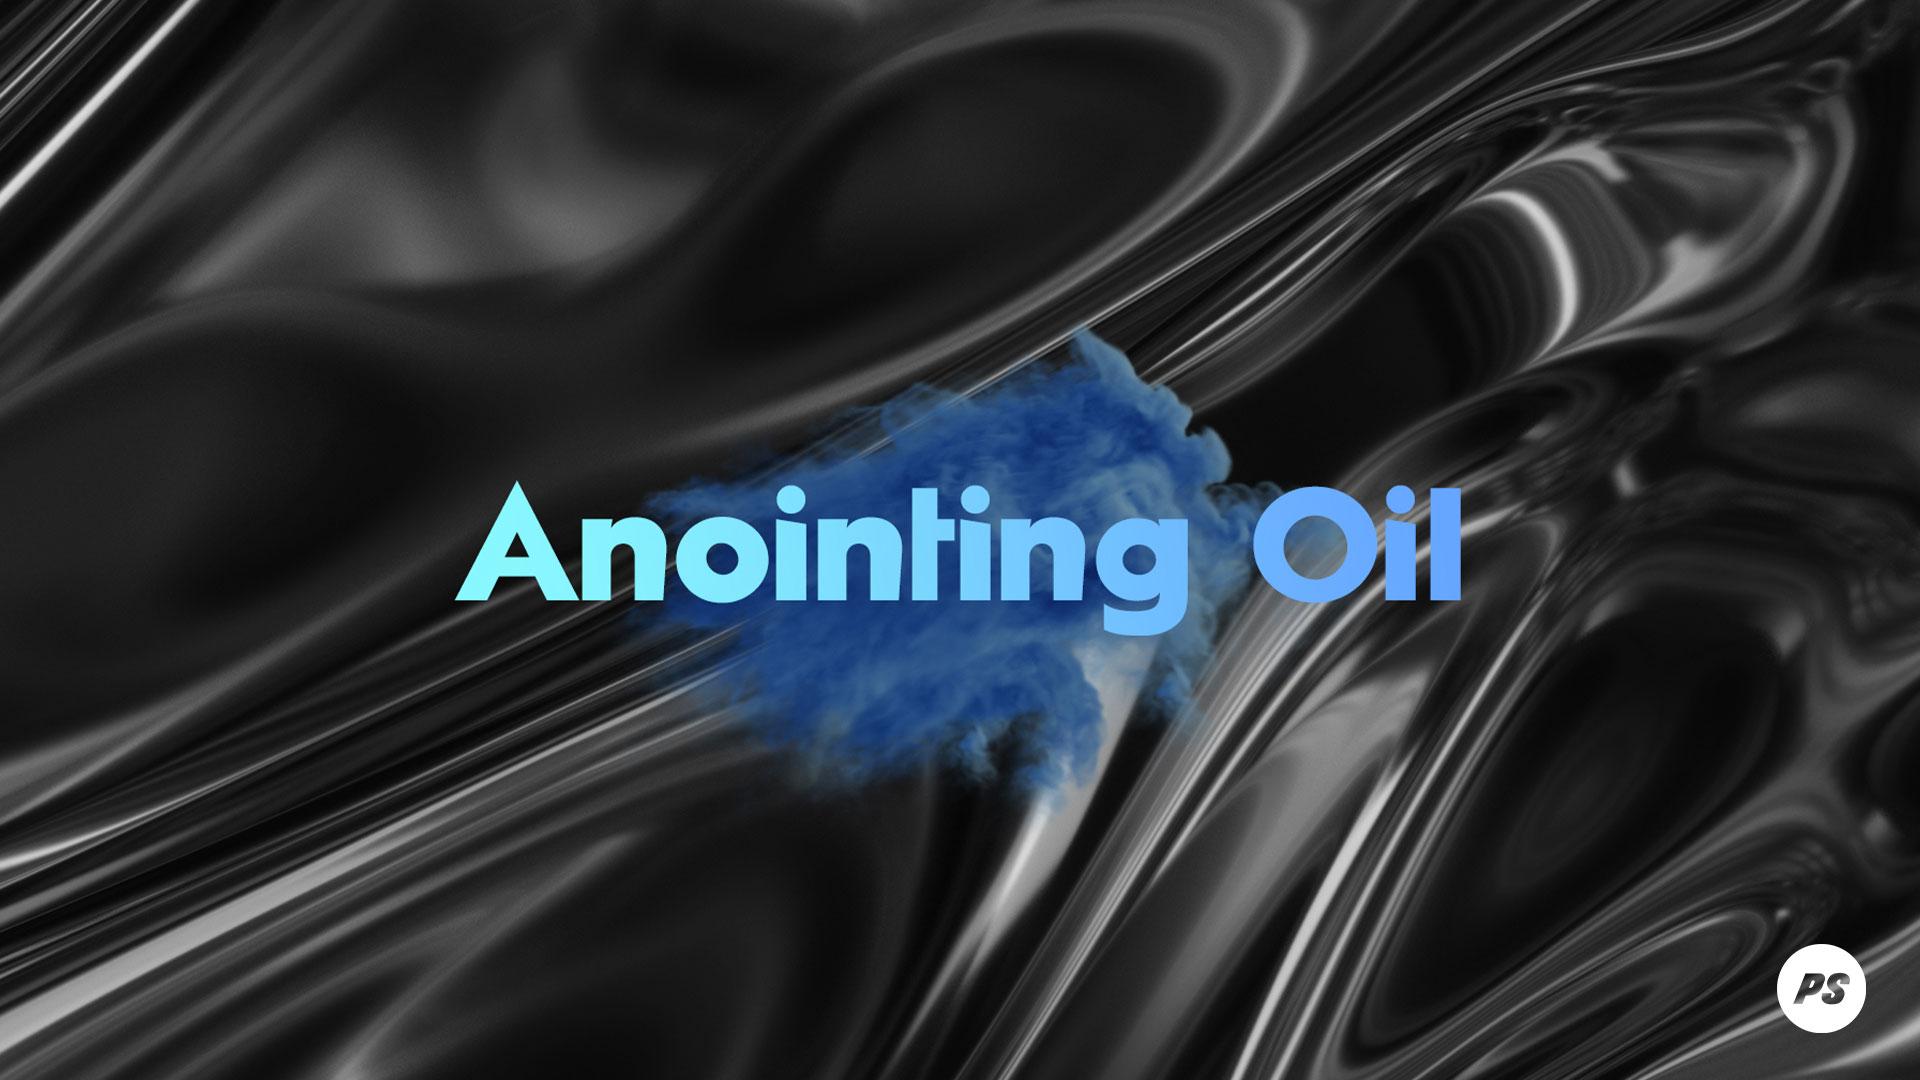 Featured Image for “The Anointing Oil”